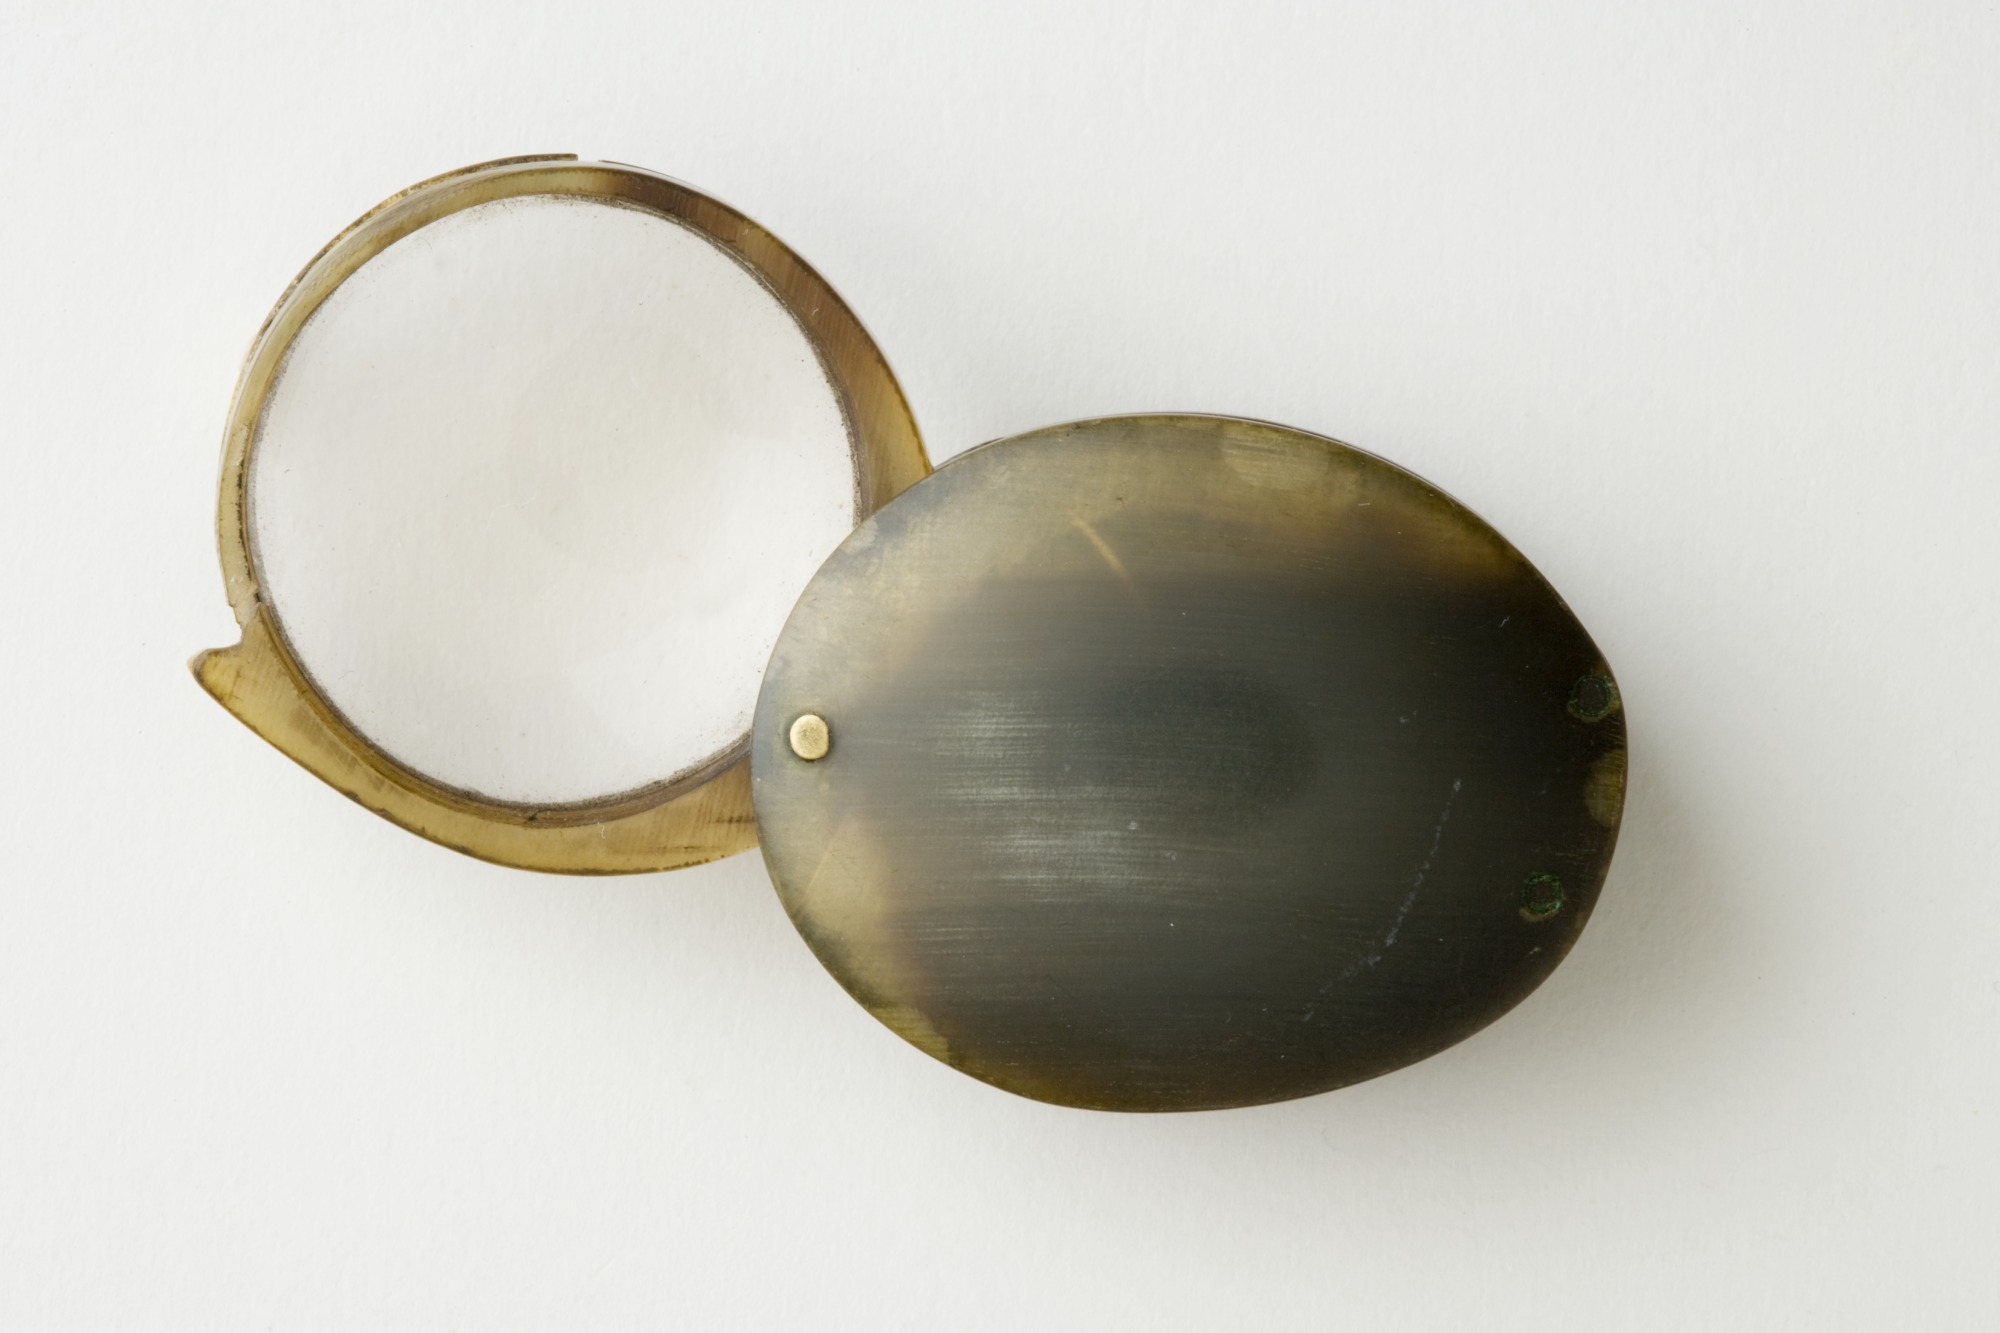 Small magnifying glass, given to astronomer William Bayly by Captain James Cook on his third voyage.